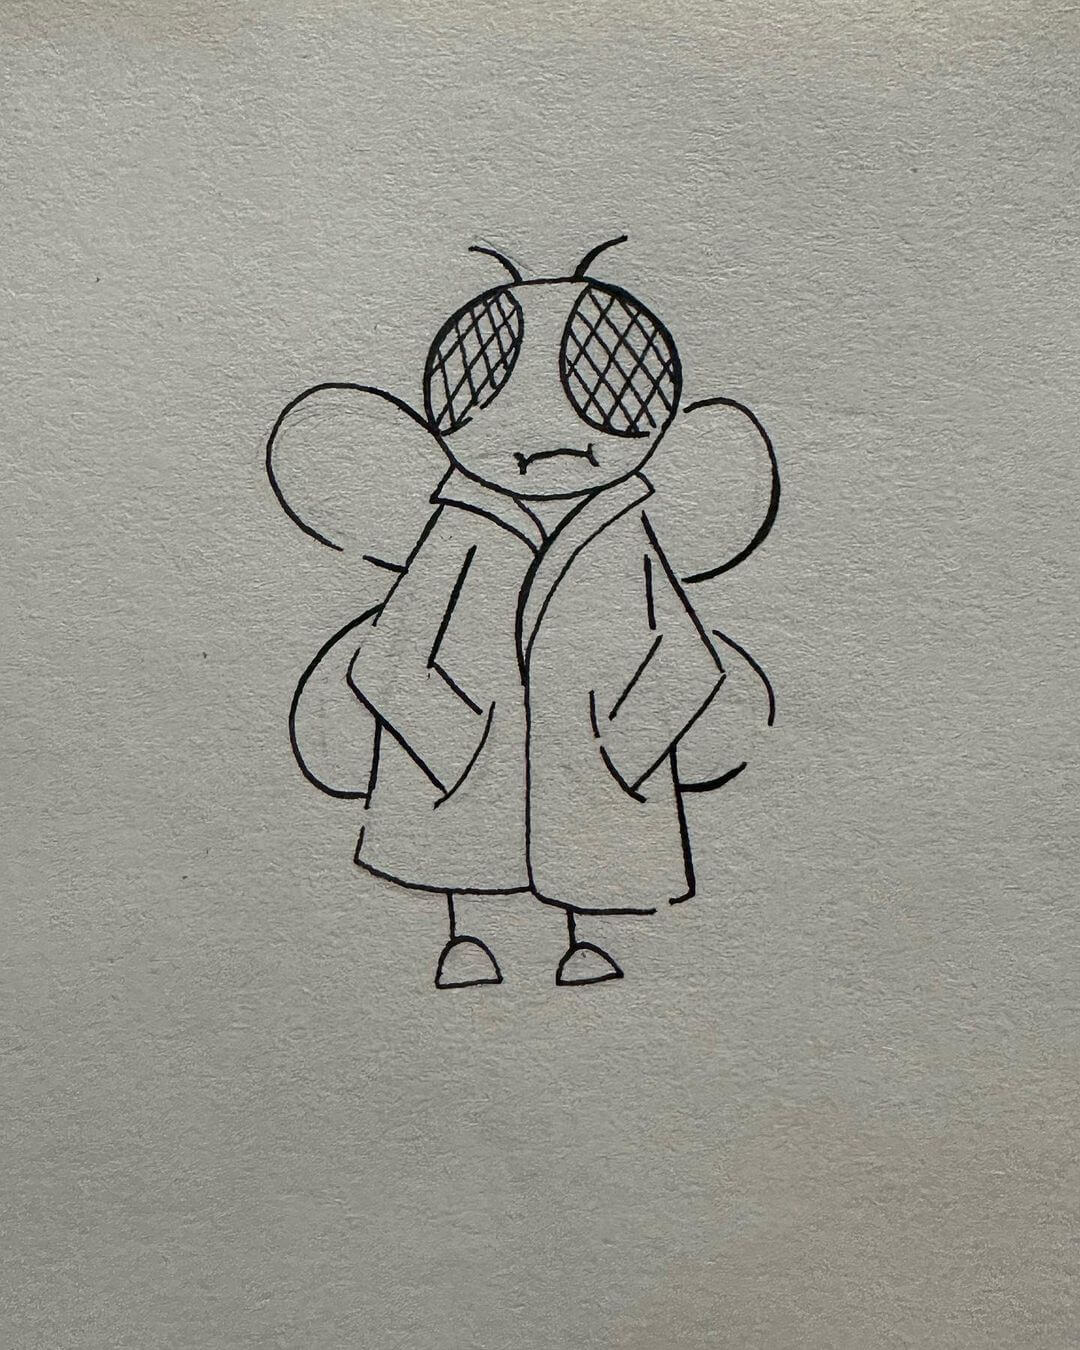 12. Not for emails - drawing of a fly wearing a coat drawn in a cartoon style.